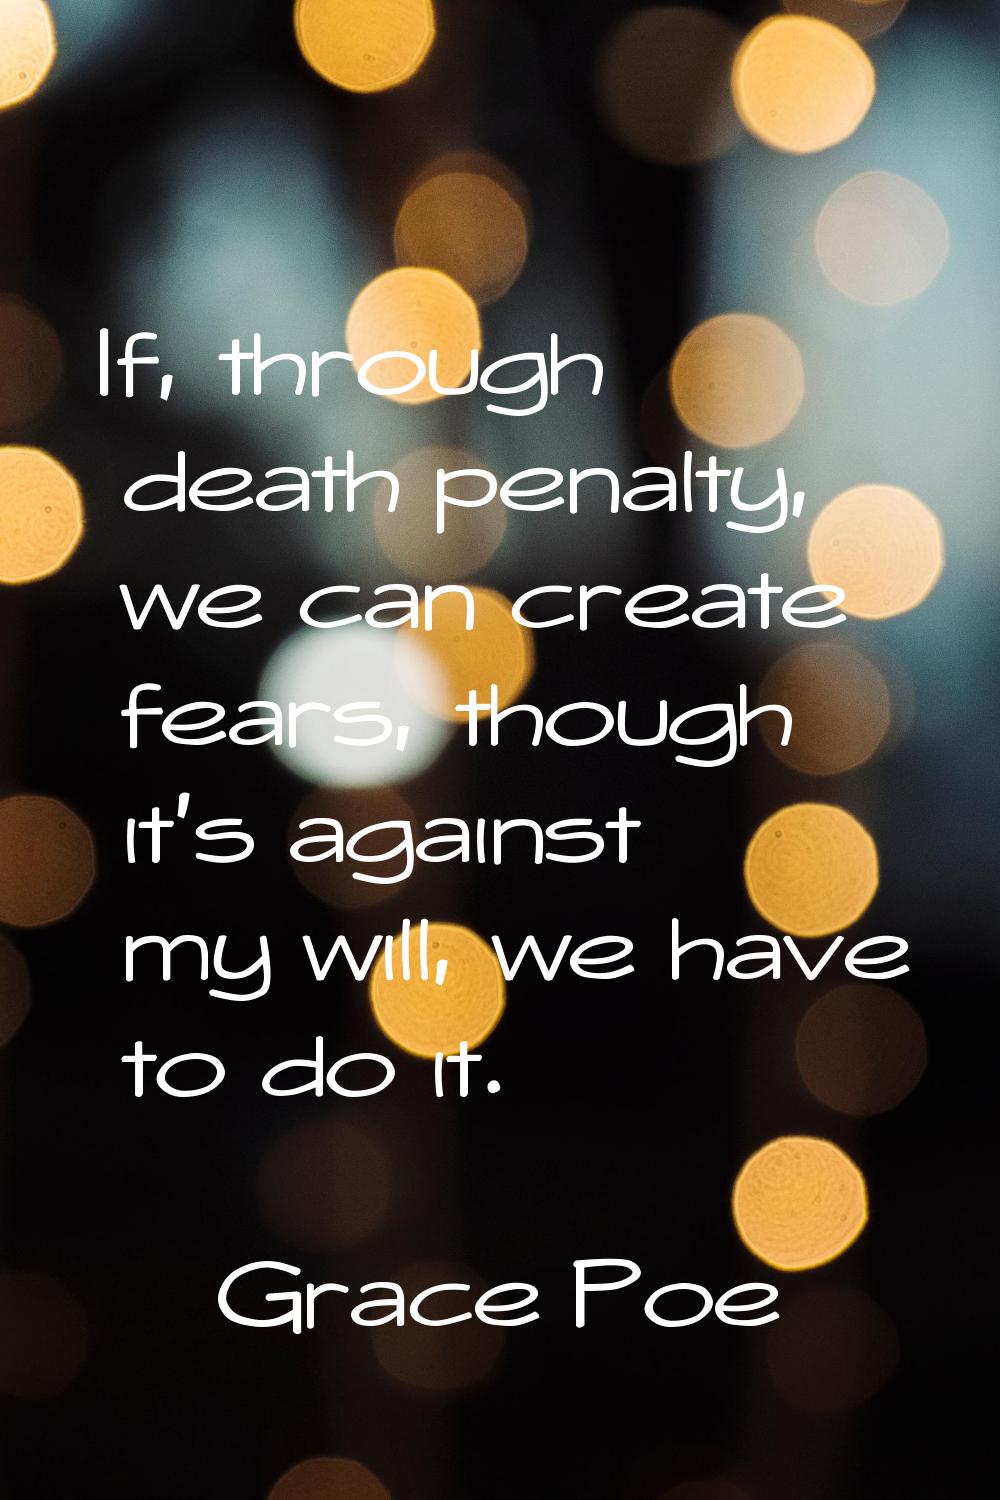 If, through death penalty, we can create fears, though it's against my will, we have to do it.